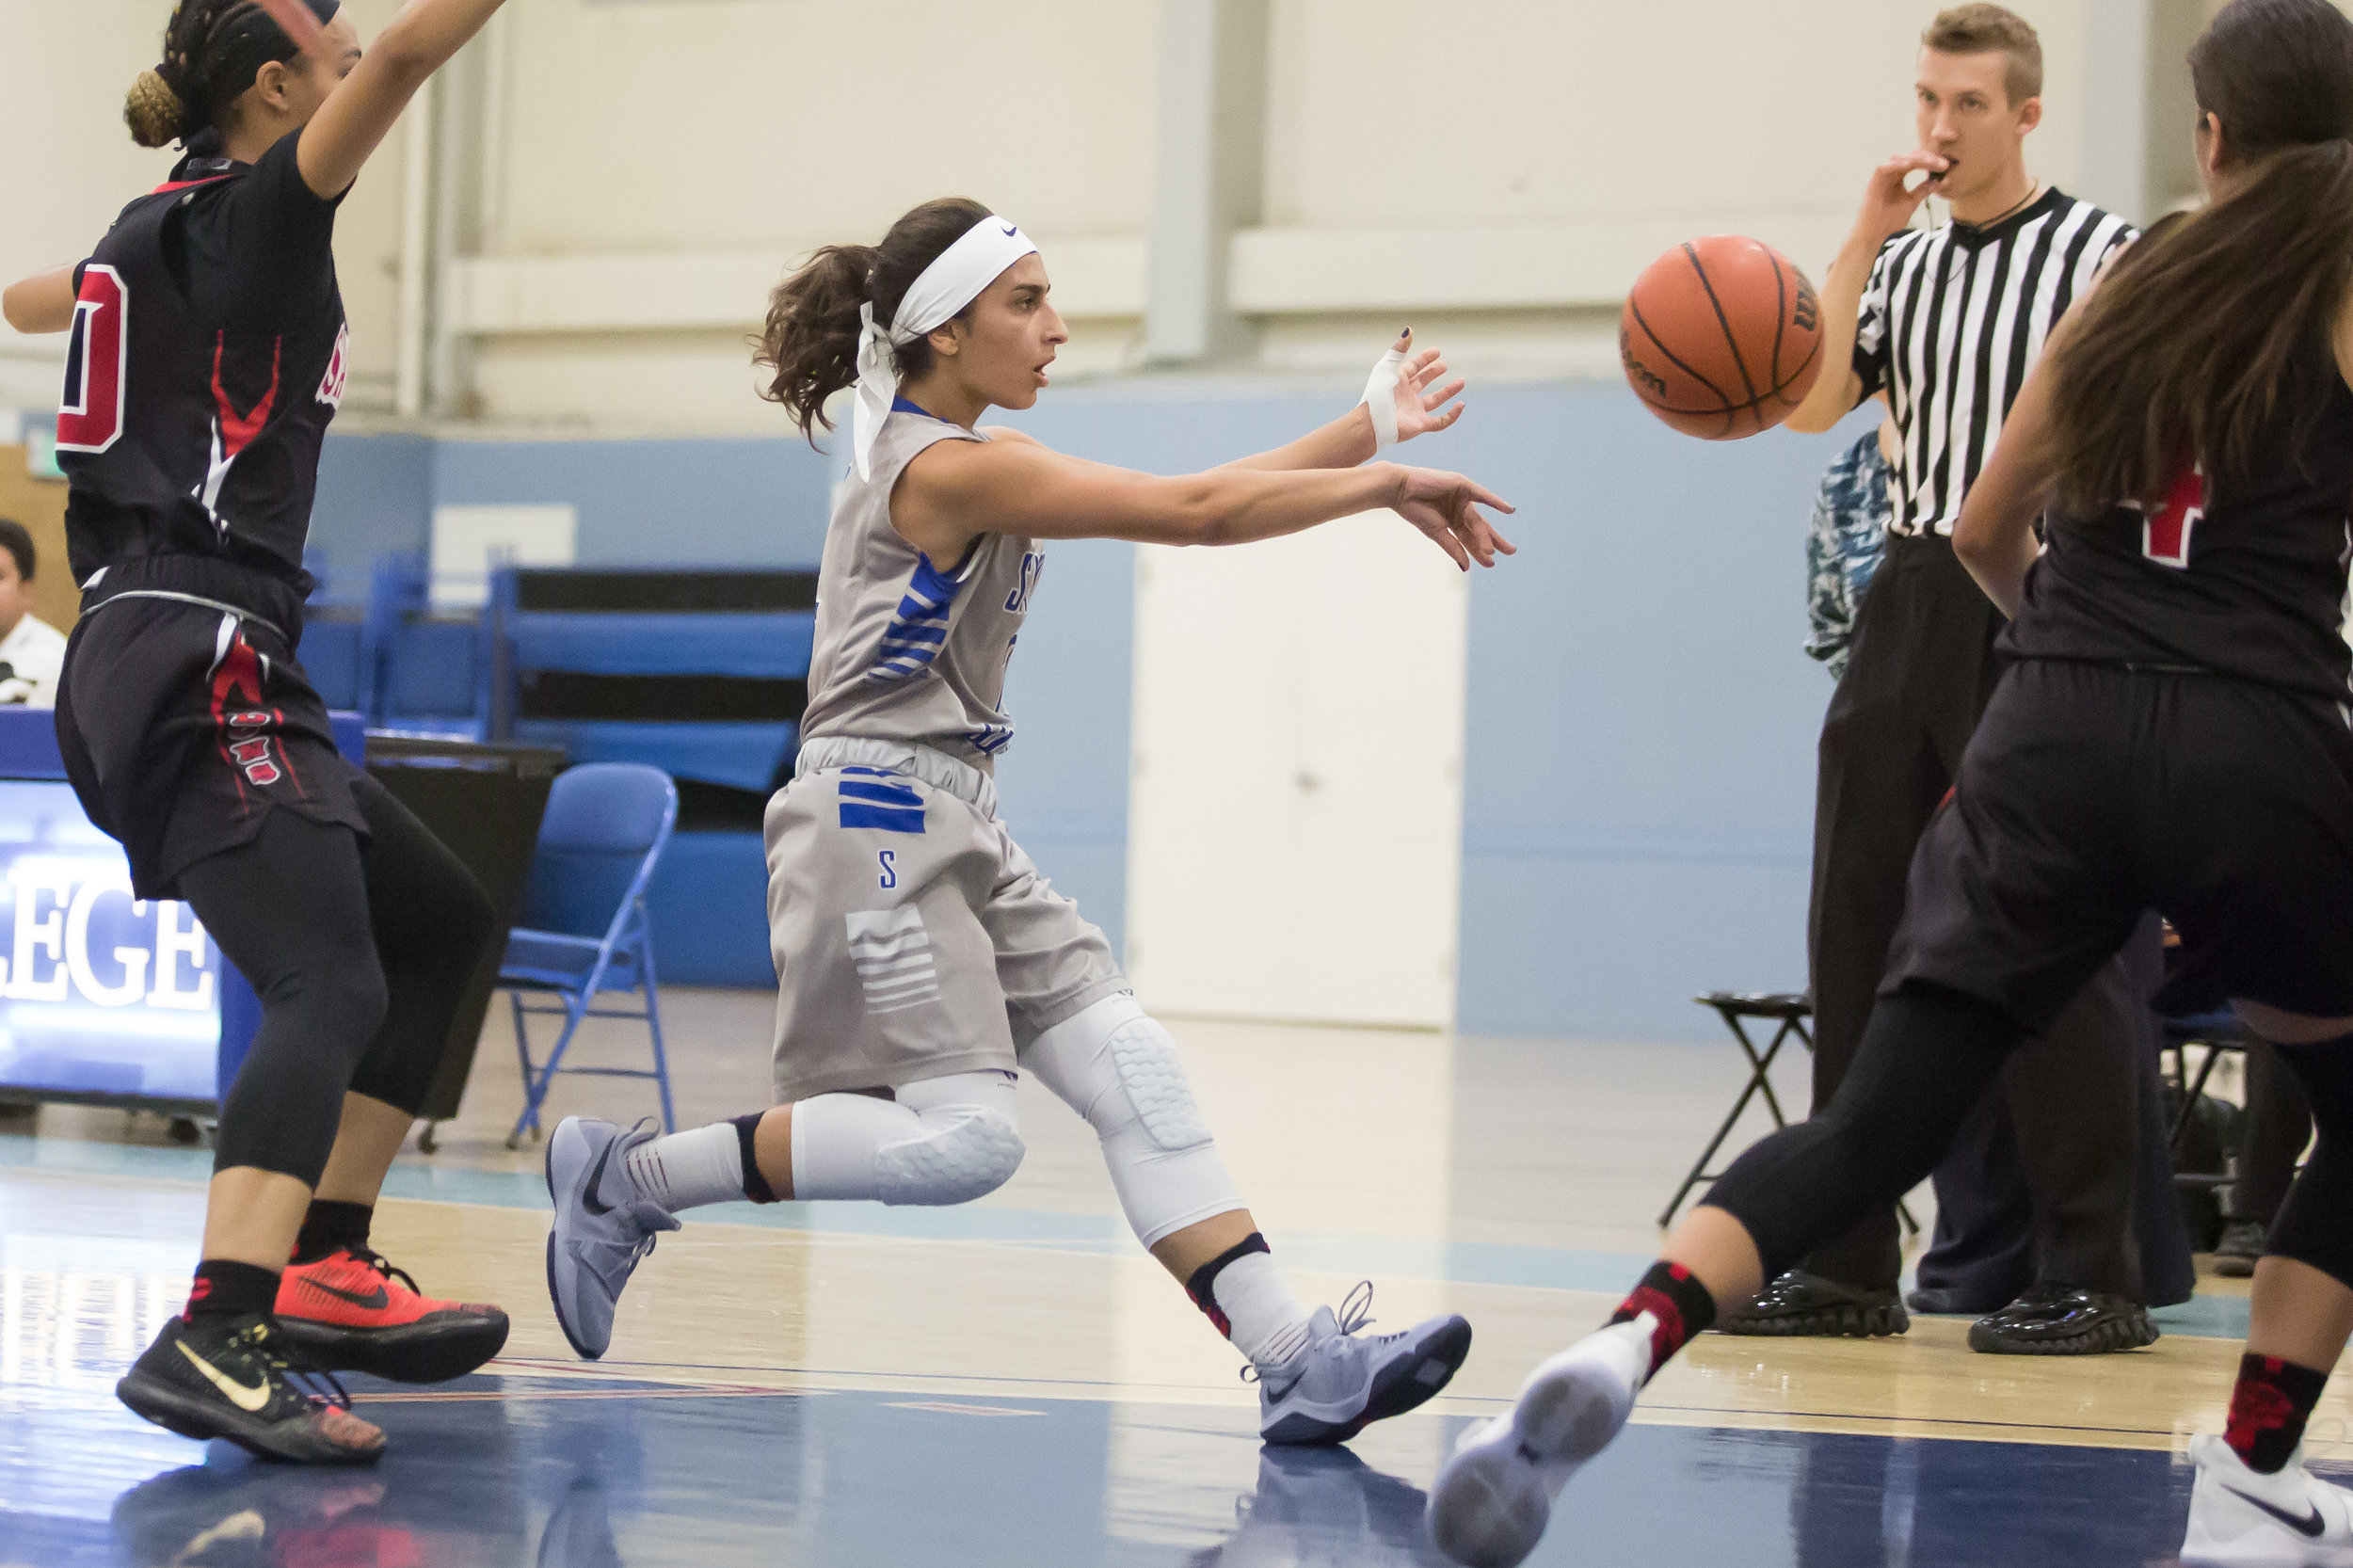  Guard Jessica Melamed (2) of Santa Monica College Corsairs  attempt to pass ball to other teammate. Santa Monica College Corsairs win the game 63-54 against Santa Ana College. On Saturday, November 4th, 2017 at the SMC Pavilion on the Santa Monica C